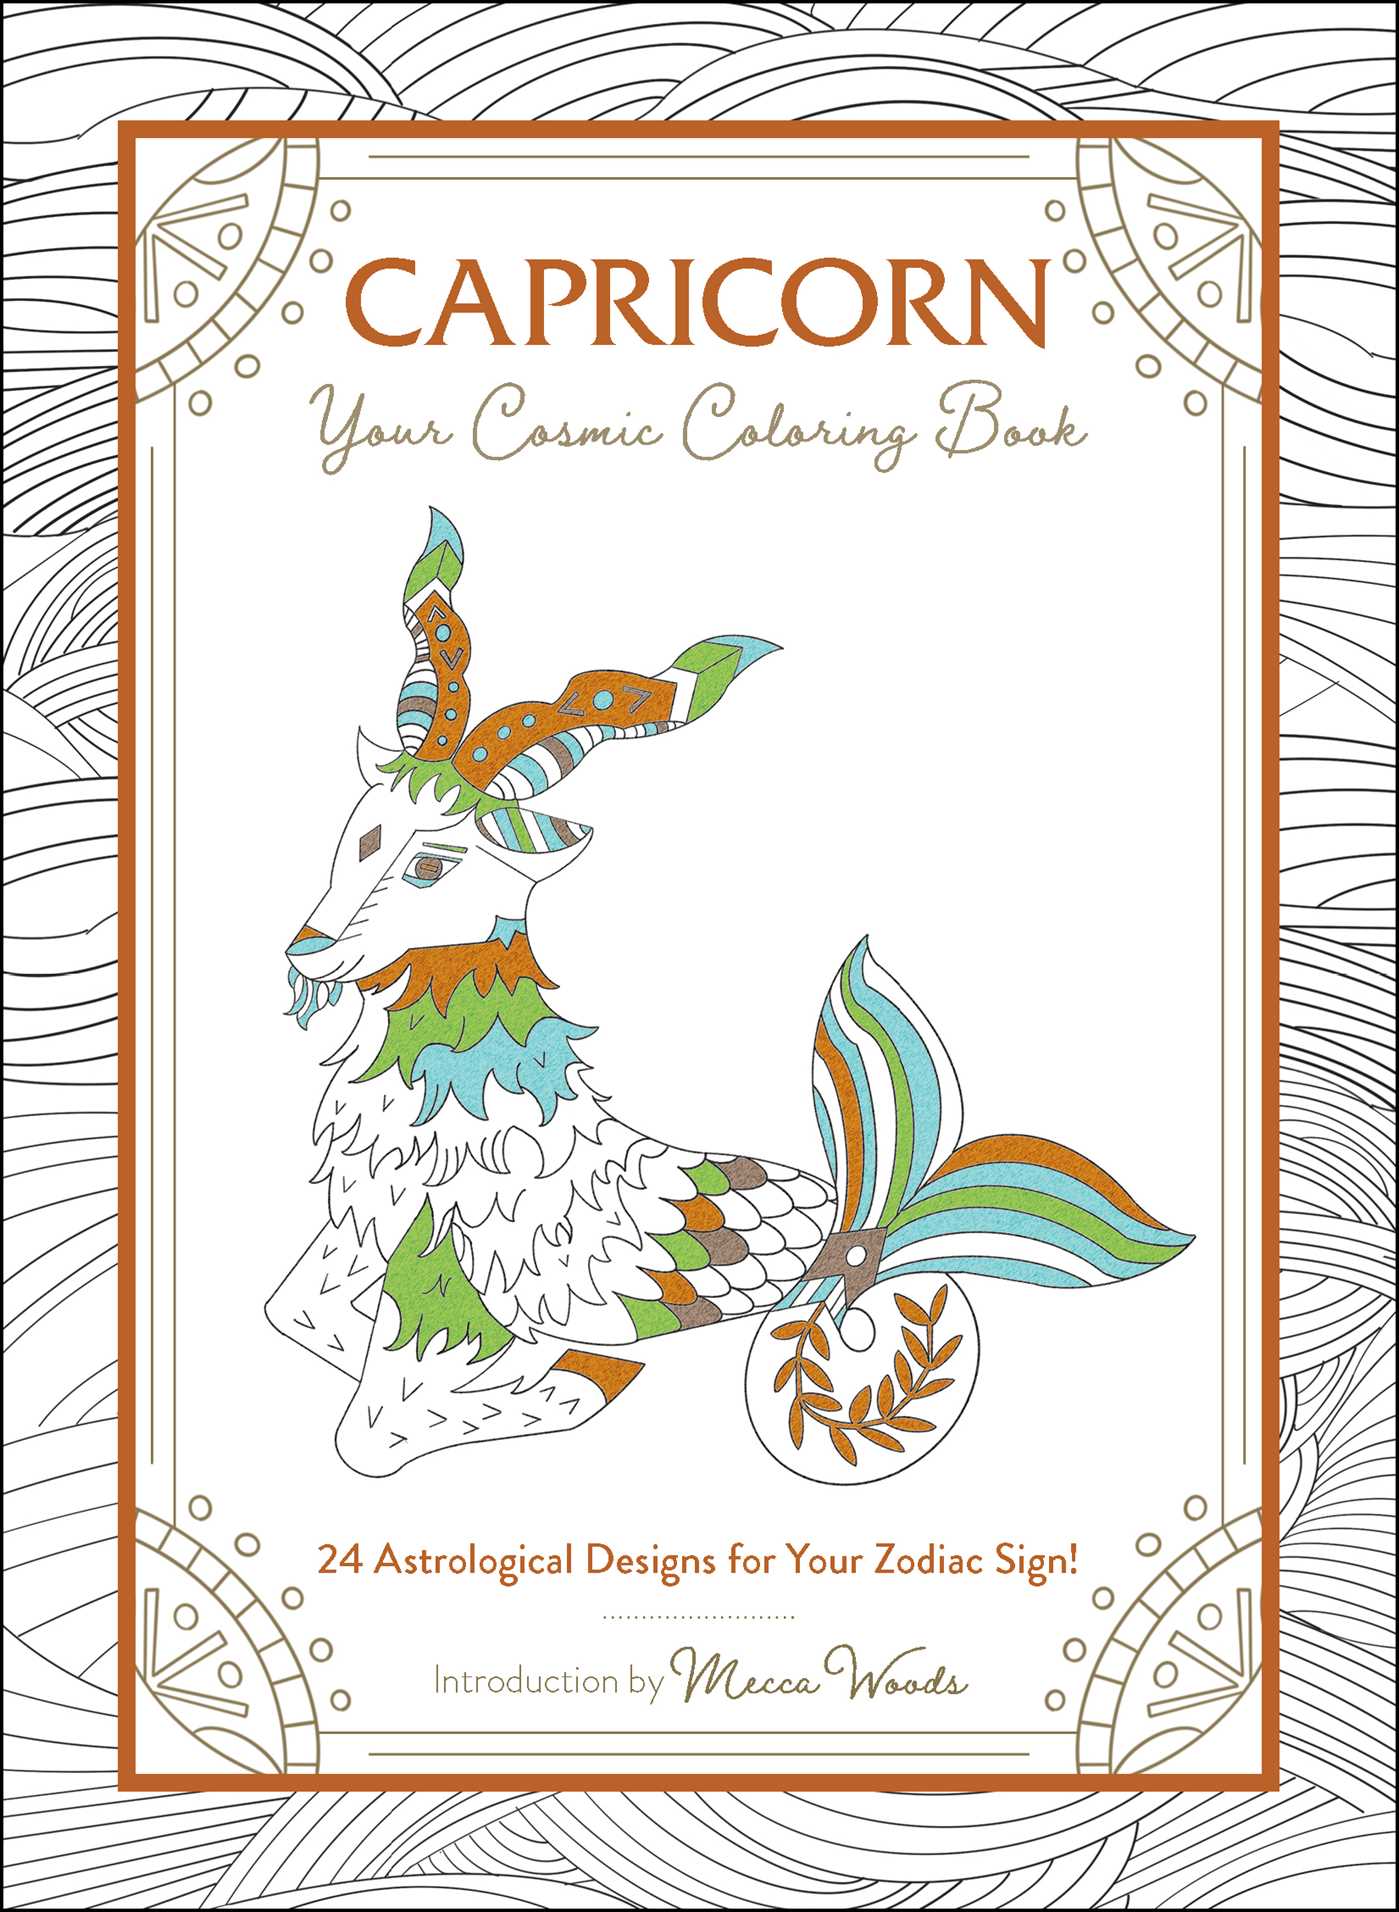 Cosmic Coloring Book Gift Series: Capricorn: Your Cosmic Coloring Book : 24 Astrological Designs for Your Zodiac Sign! (Paperback) - image 1 of 1